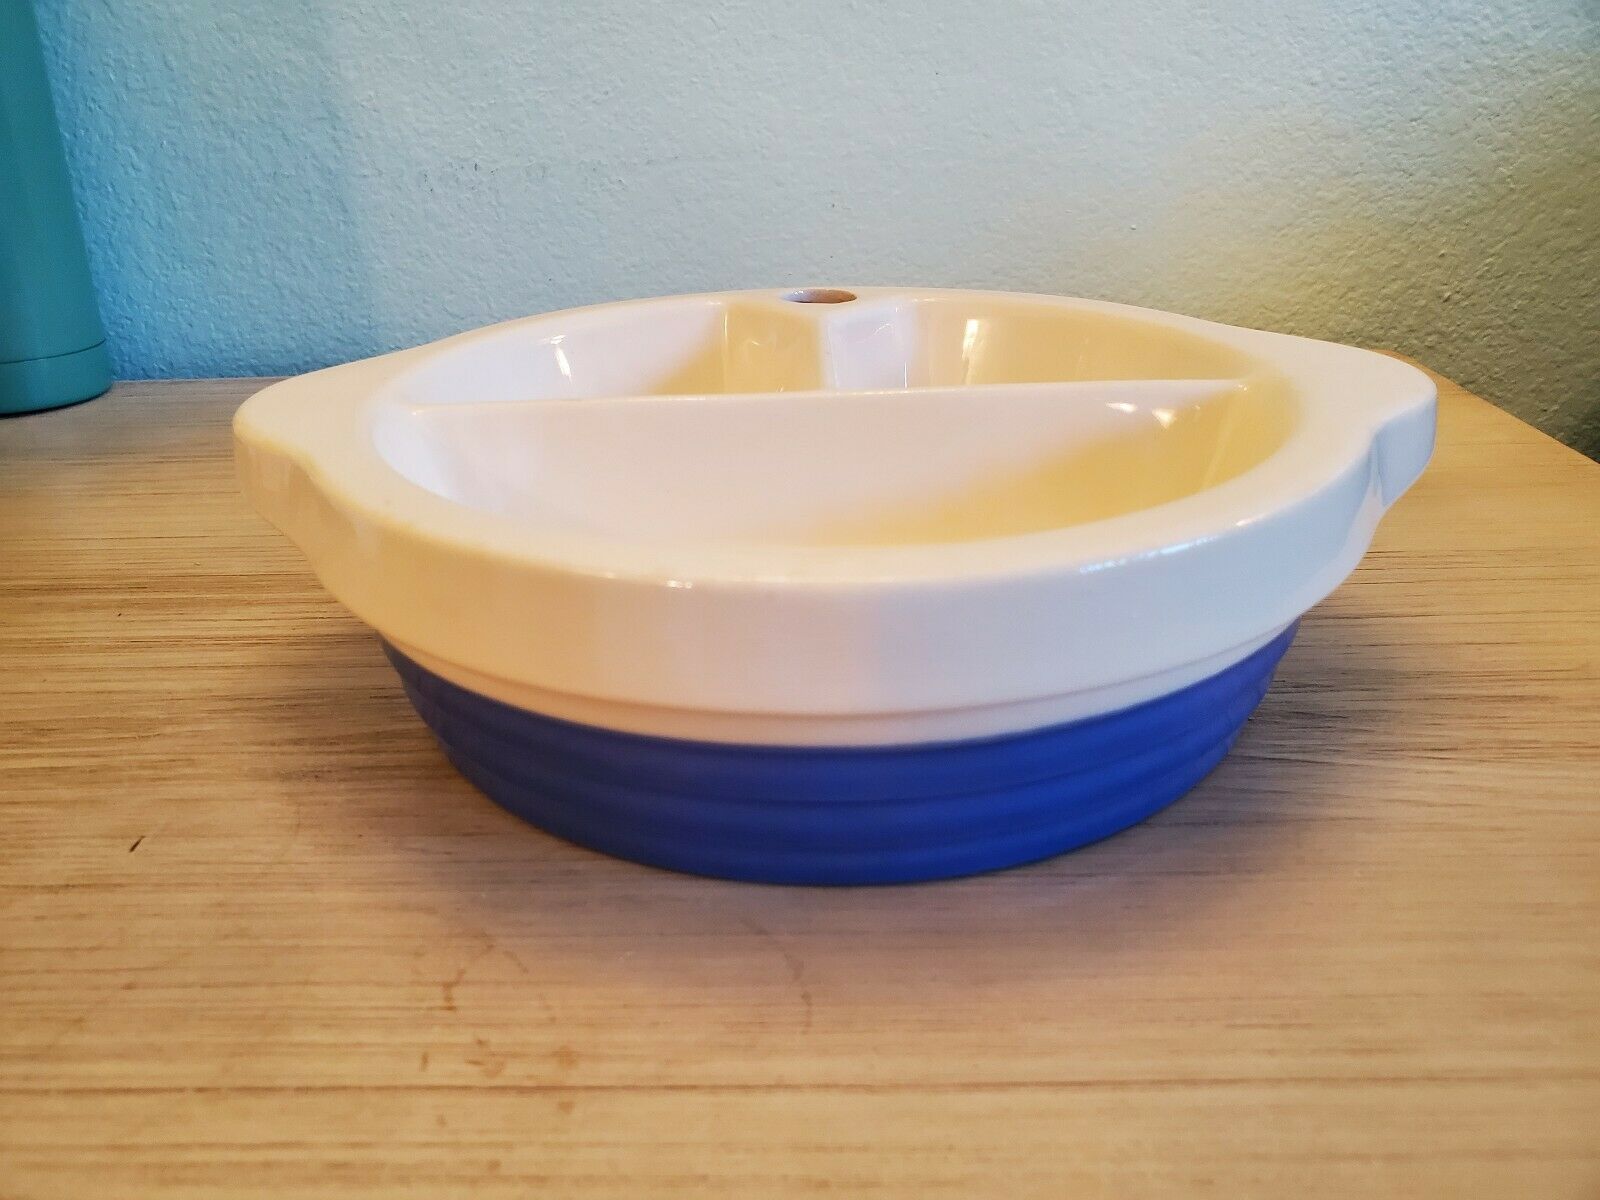 Baby Warming Food Dish Blue & White Ceramic Guc 1950s Excello